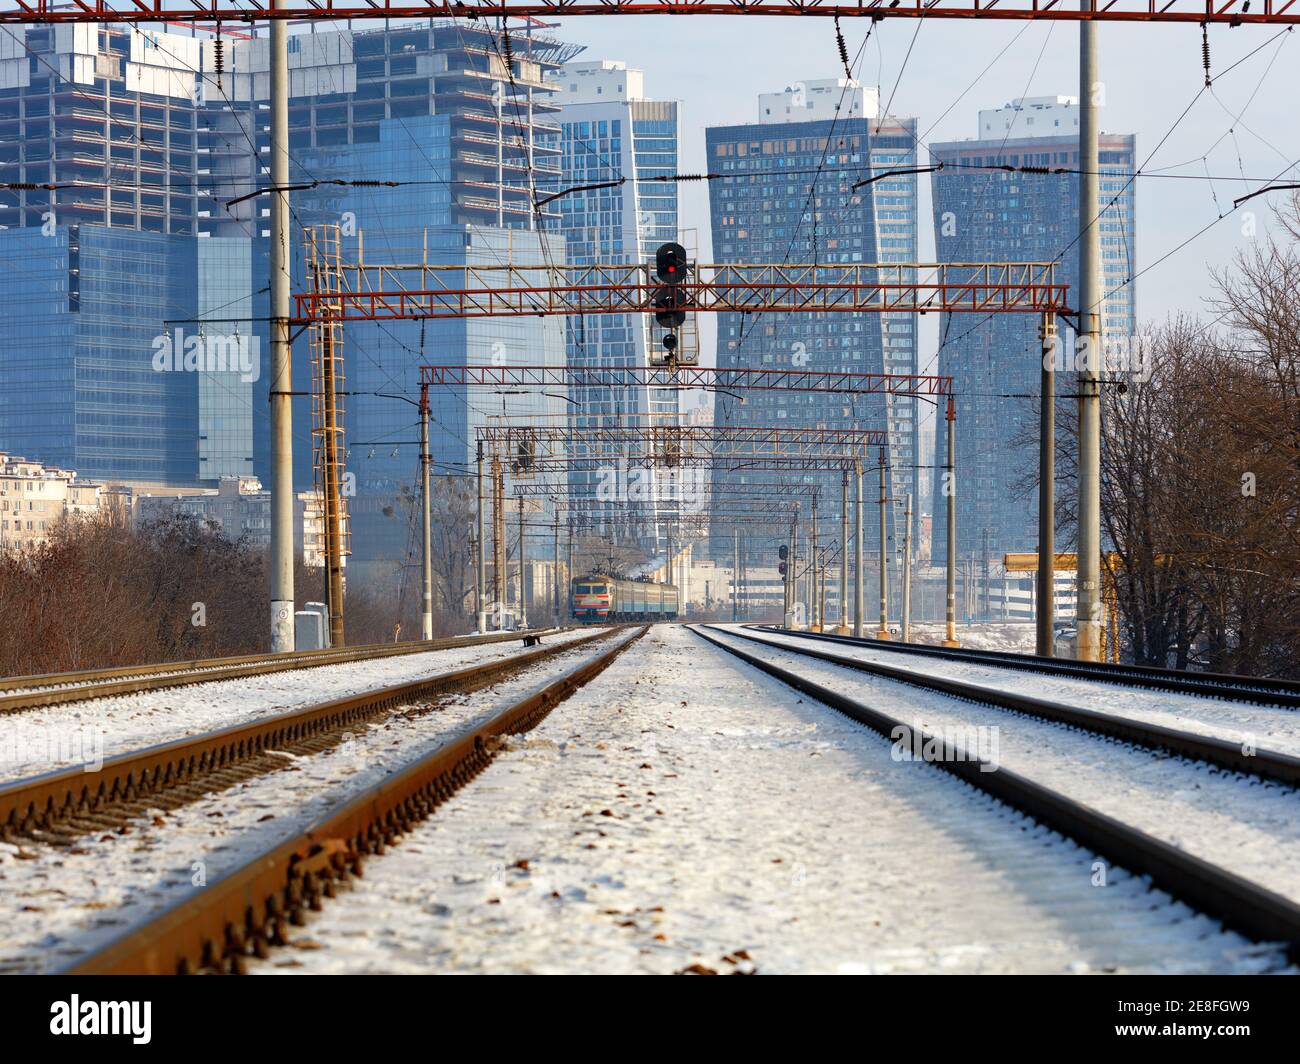 The electric train moves on rails against the backdrop of a winter cityscape of skyscrapers, central perspective, copy space. Stock Photo